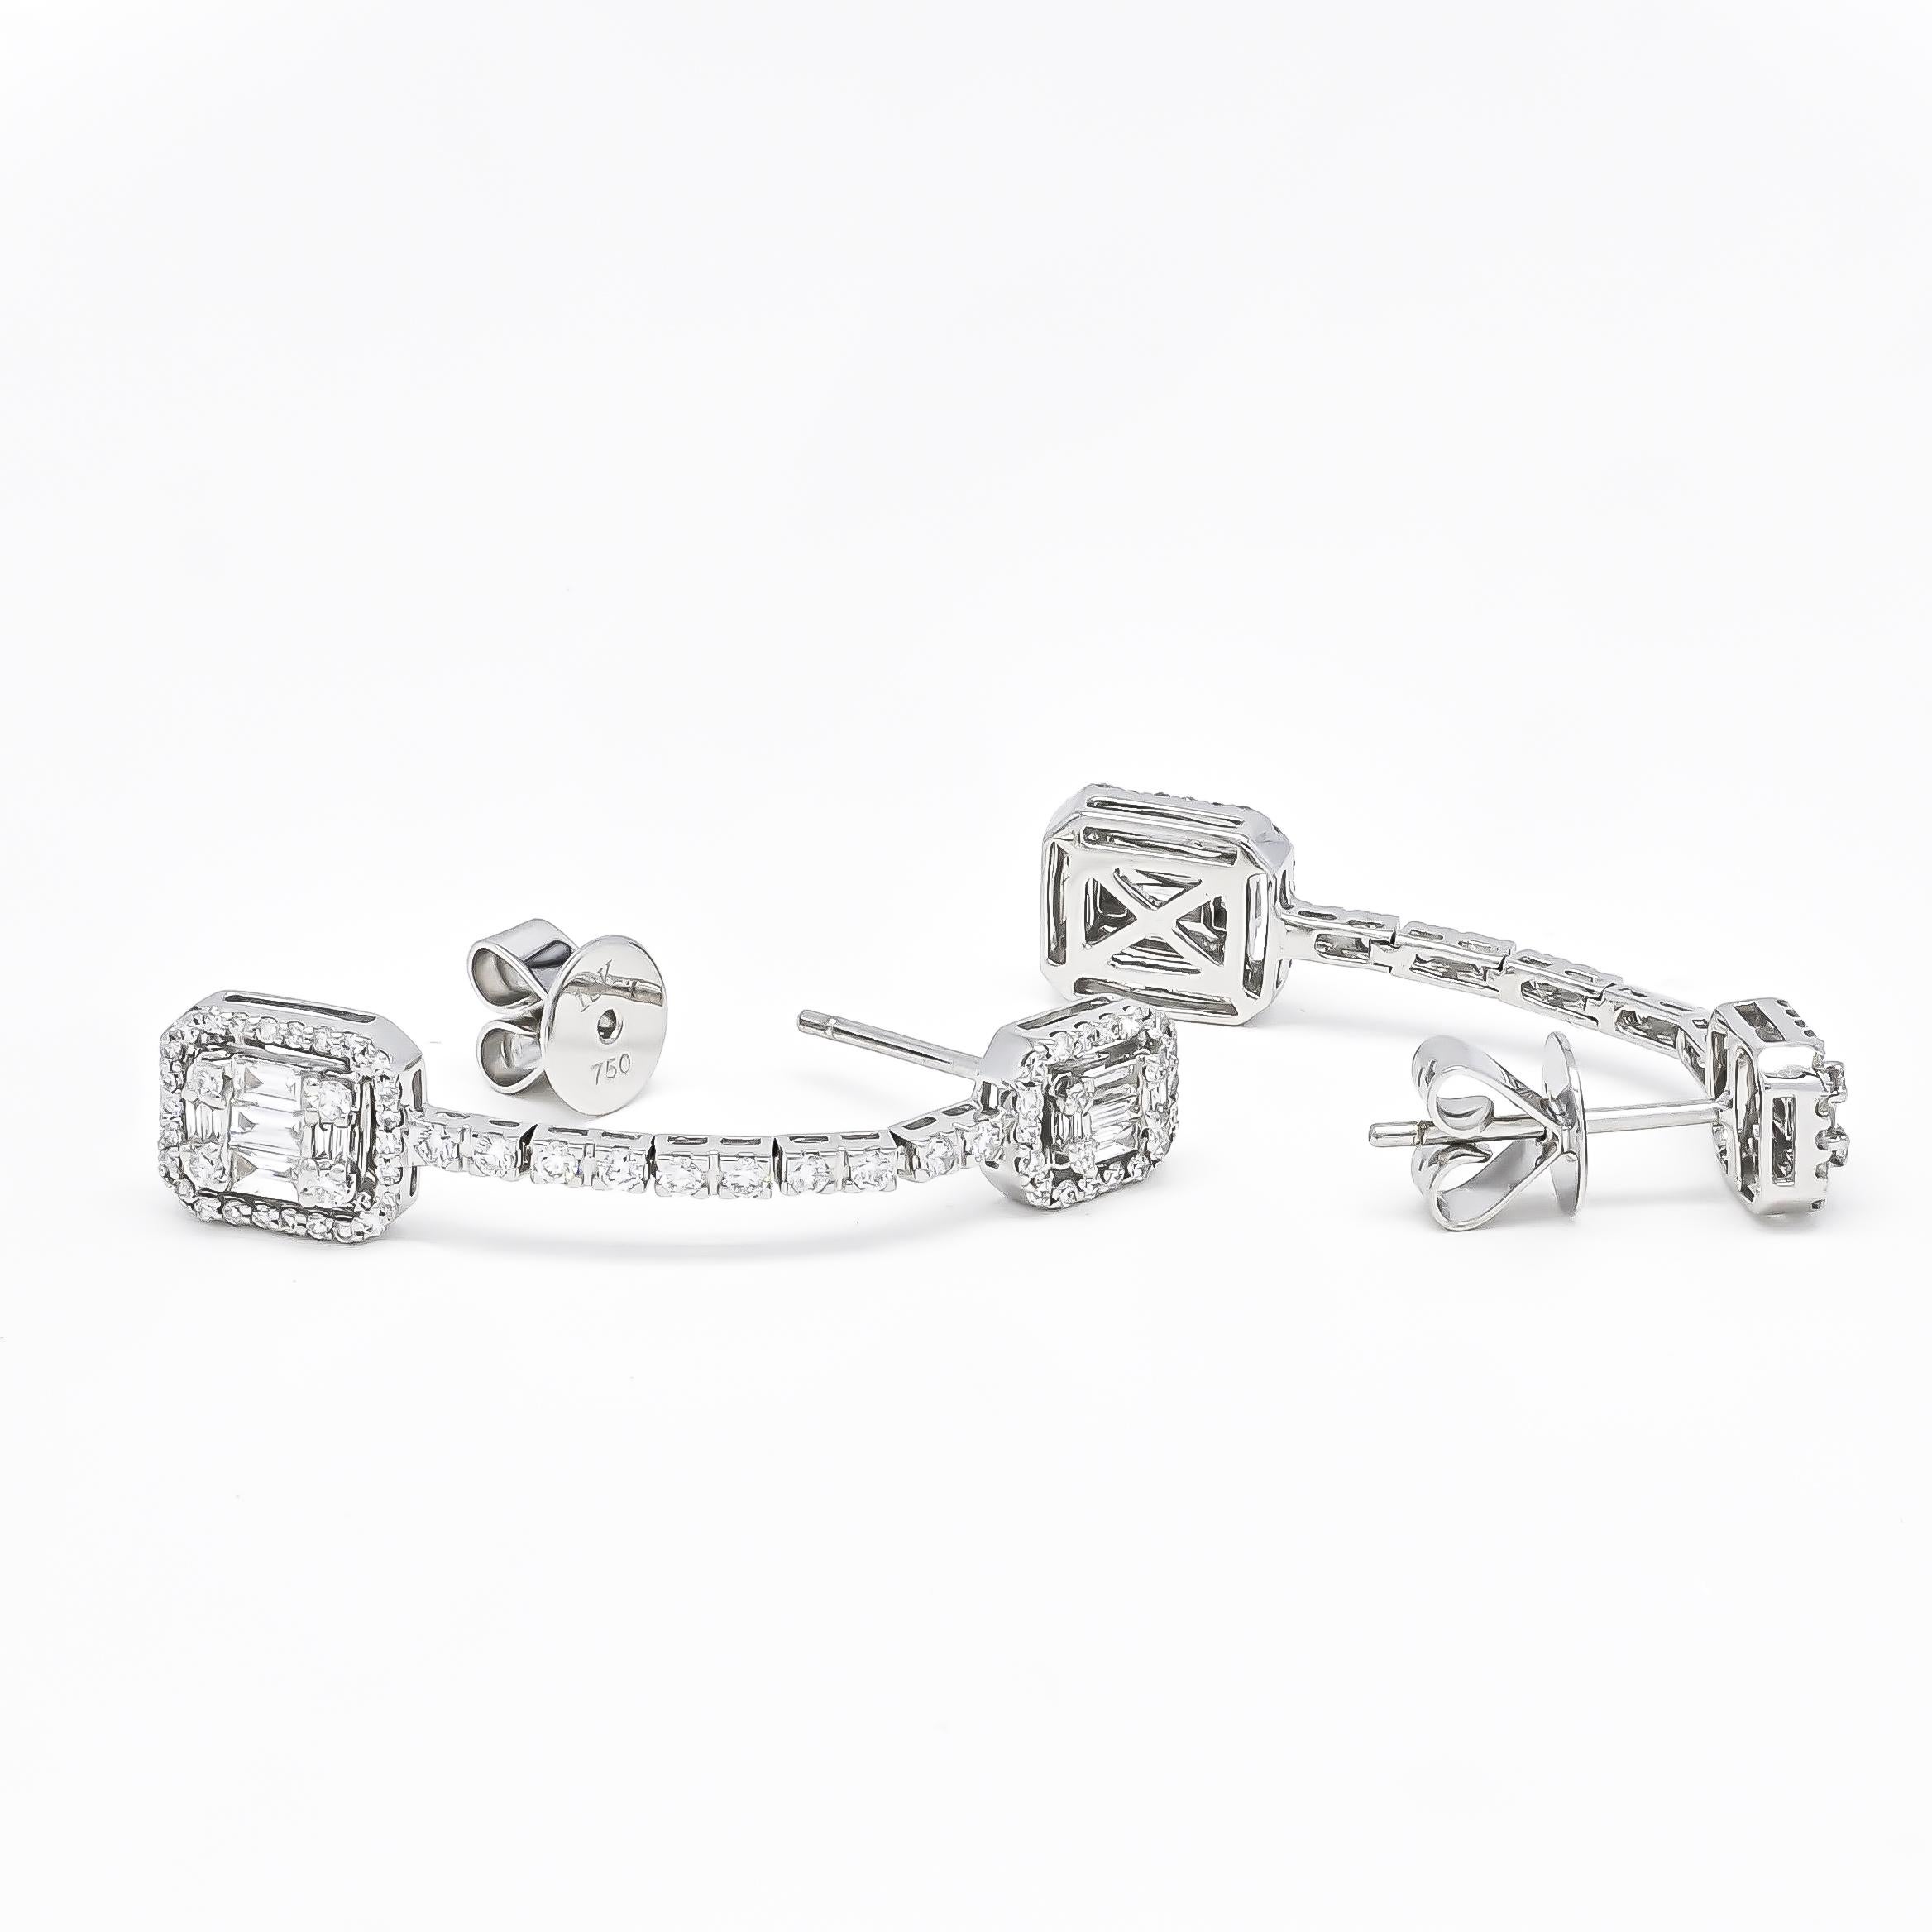 Introducing our 18KT White Gold Baguette Illusion Halo Natural Diamonds Dangler Drop Earrings, a stunning and unique piece that will take your breath away. These earrings feature a combination of natural diamonds set in a sophisticated baguette and